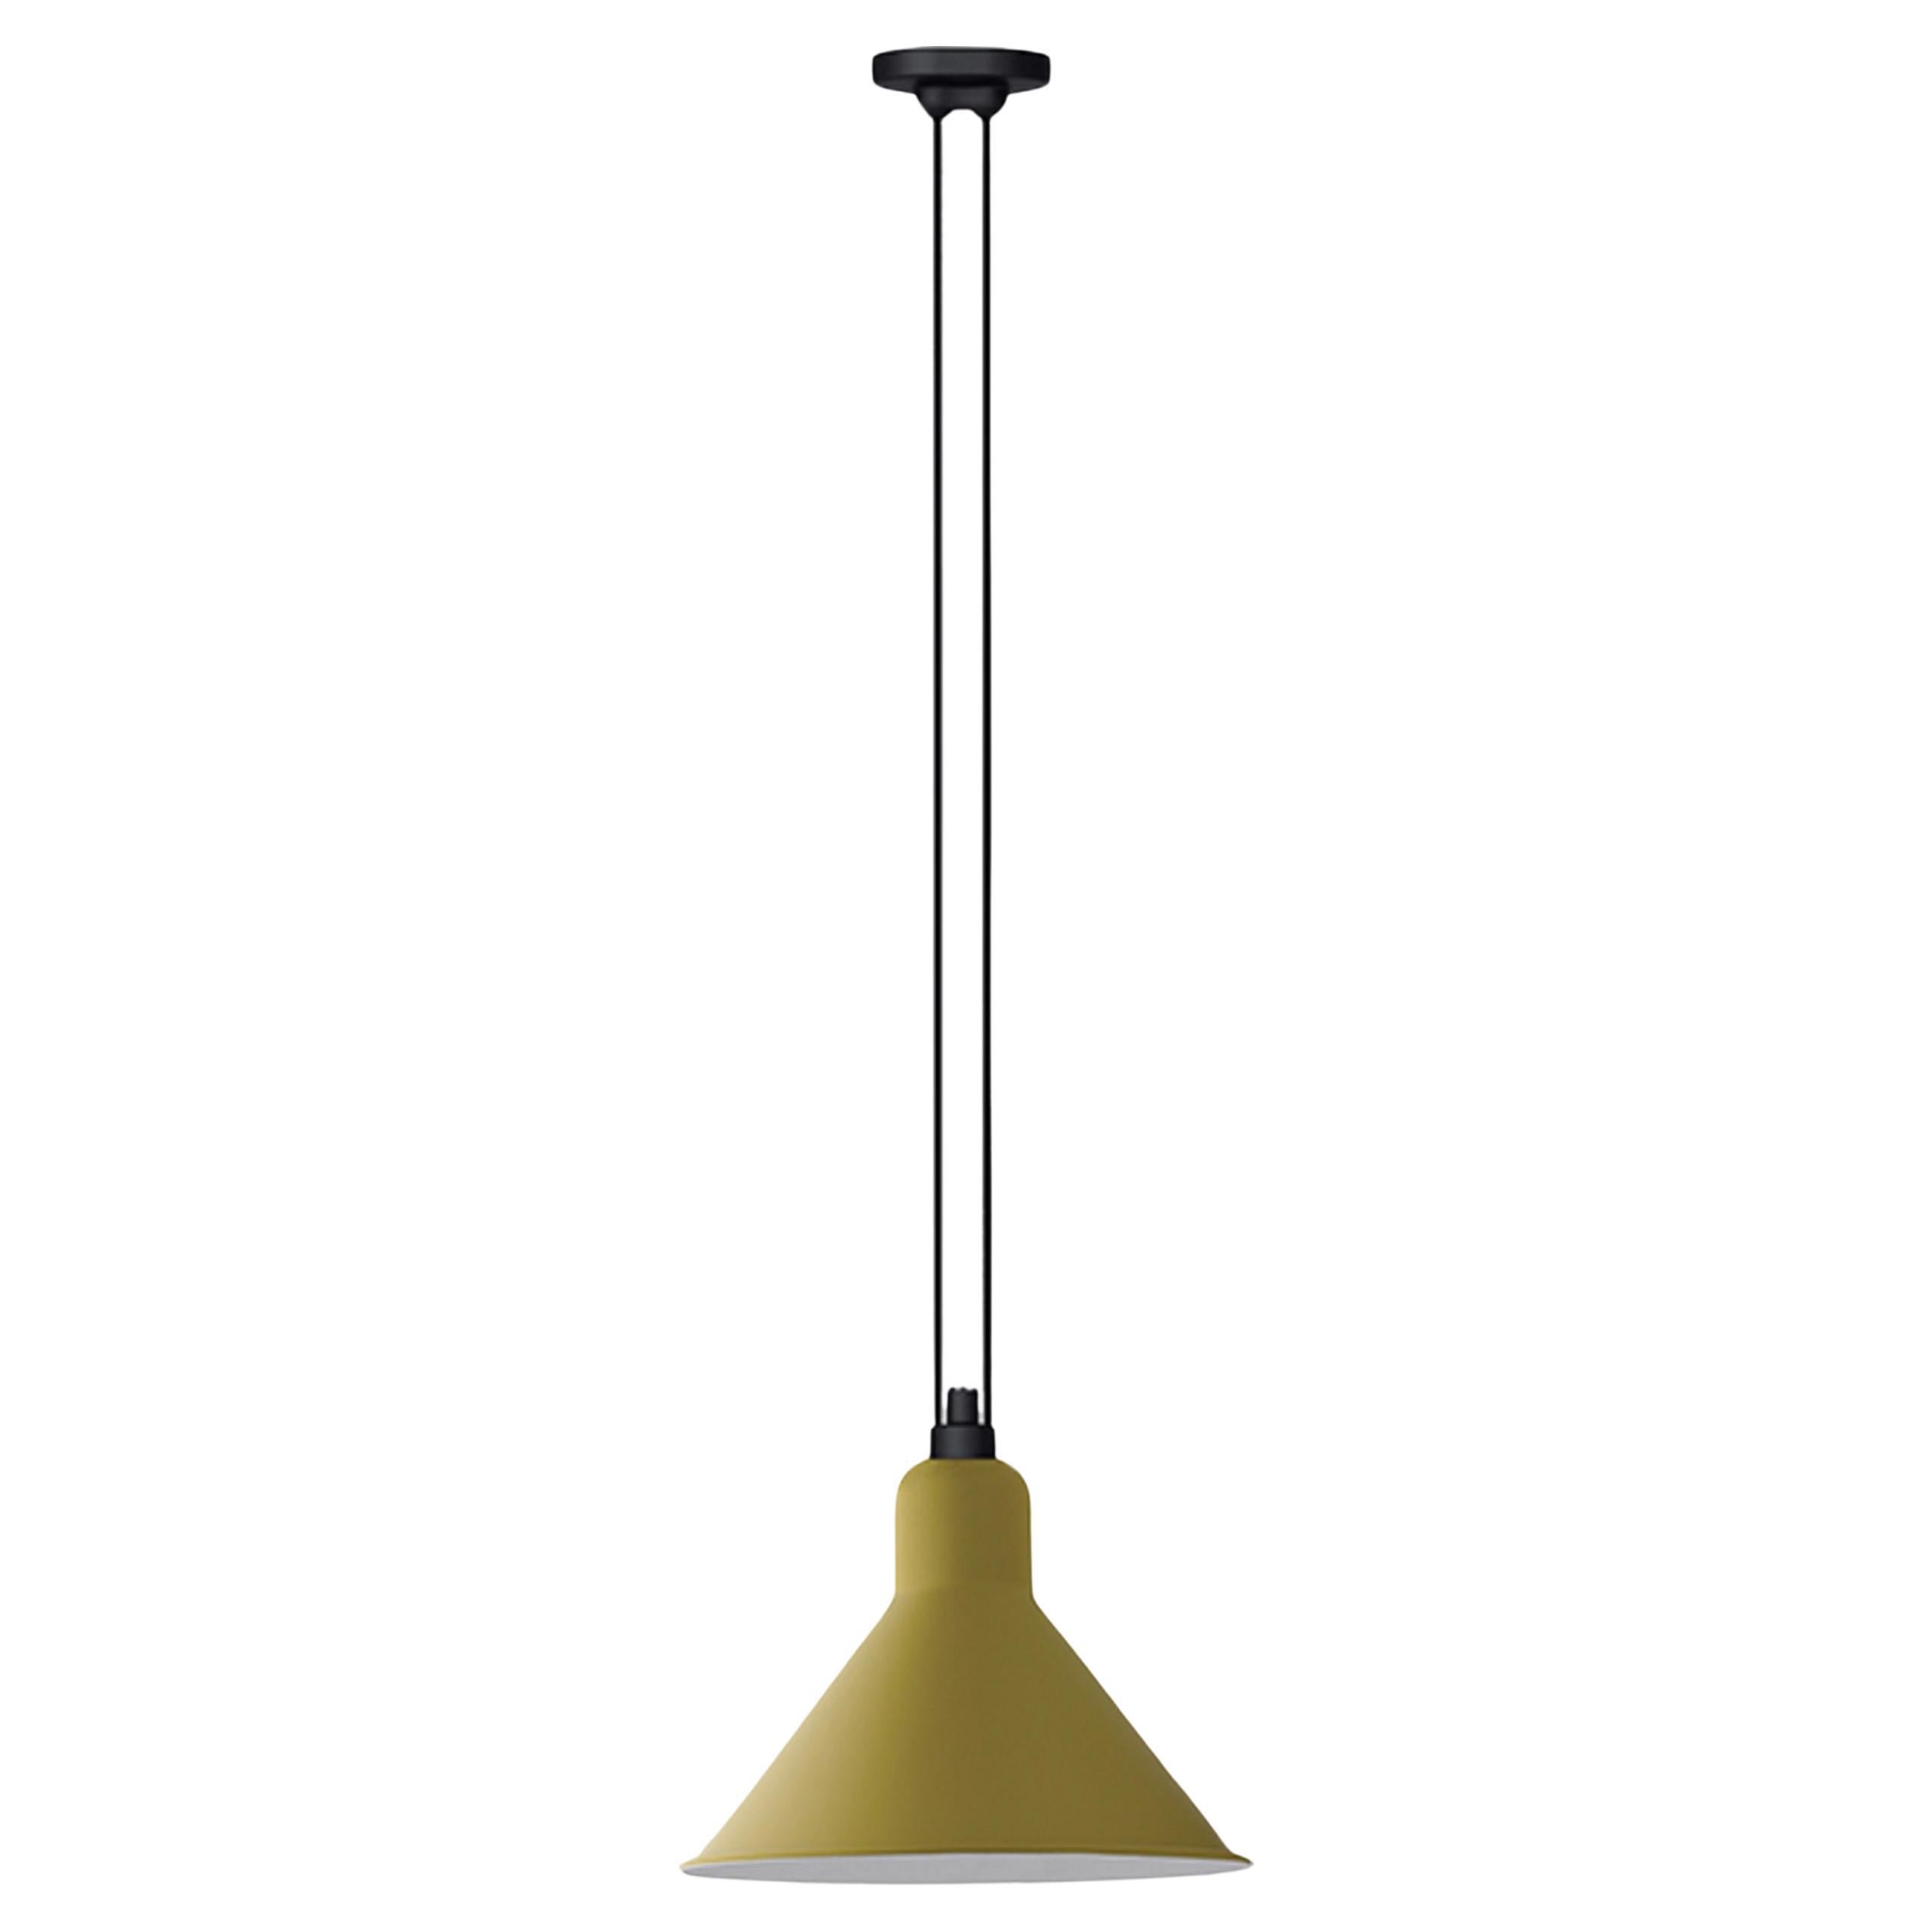 DCW Editions Les Acrobates N°322 XL Conic Pendant Lamp in Yellow Shade For Sale